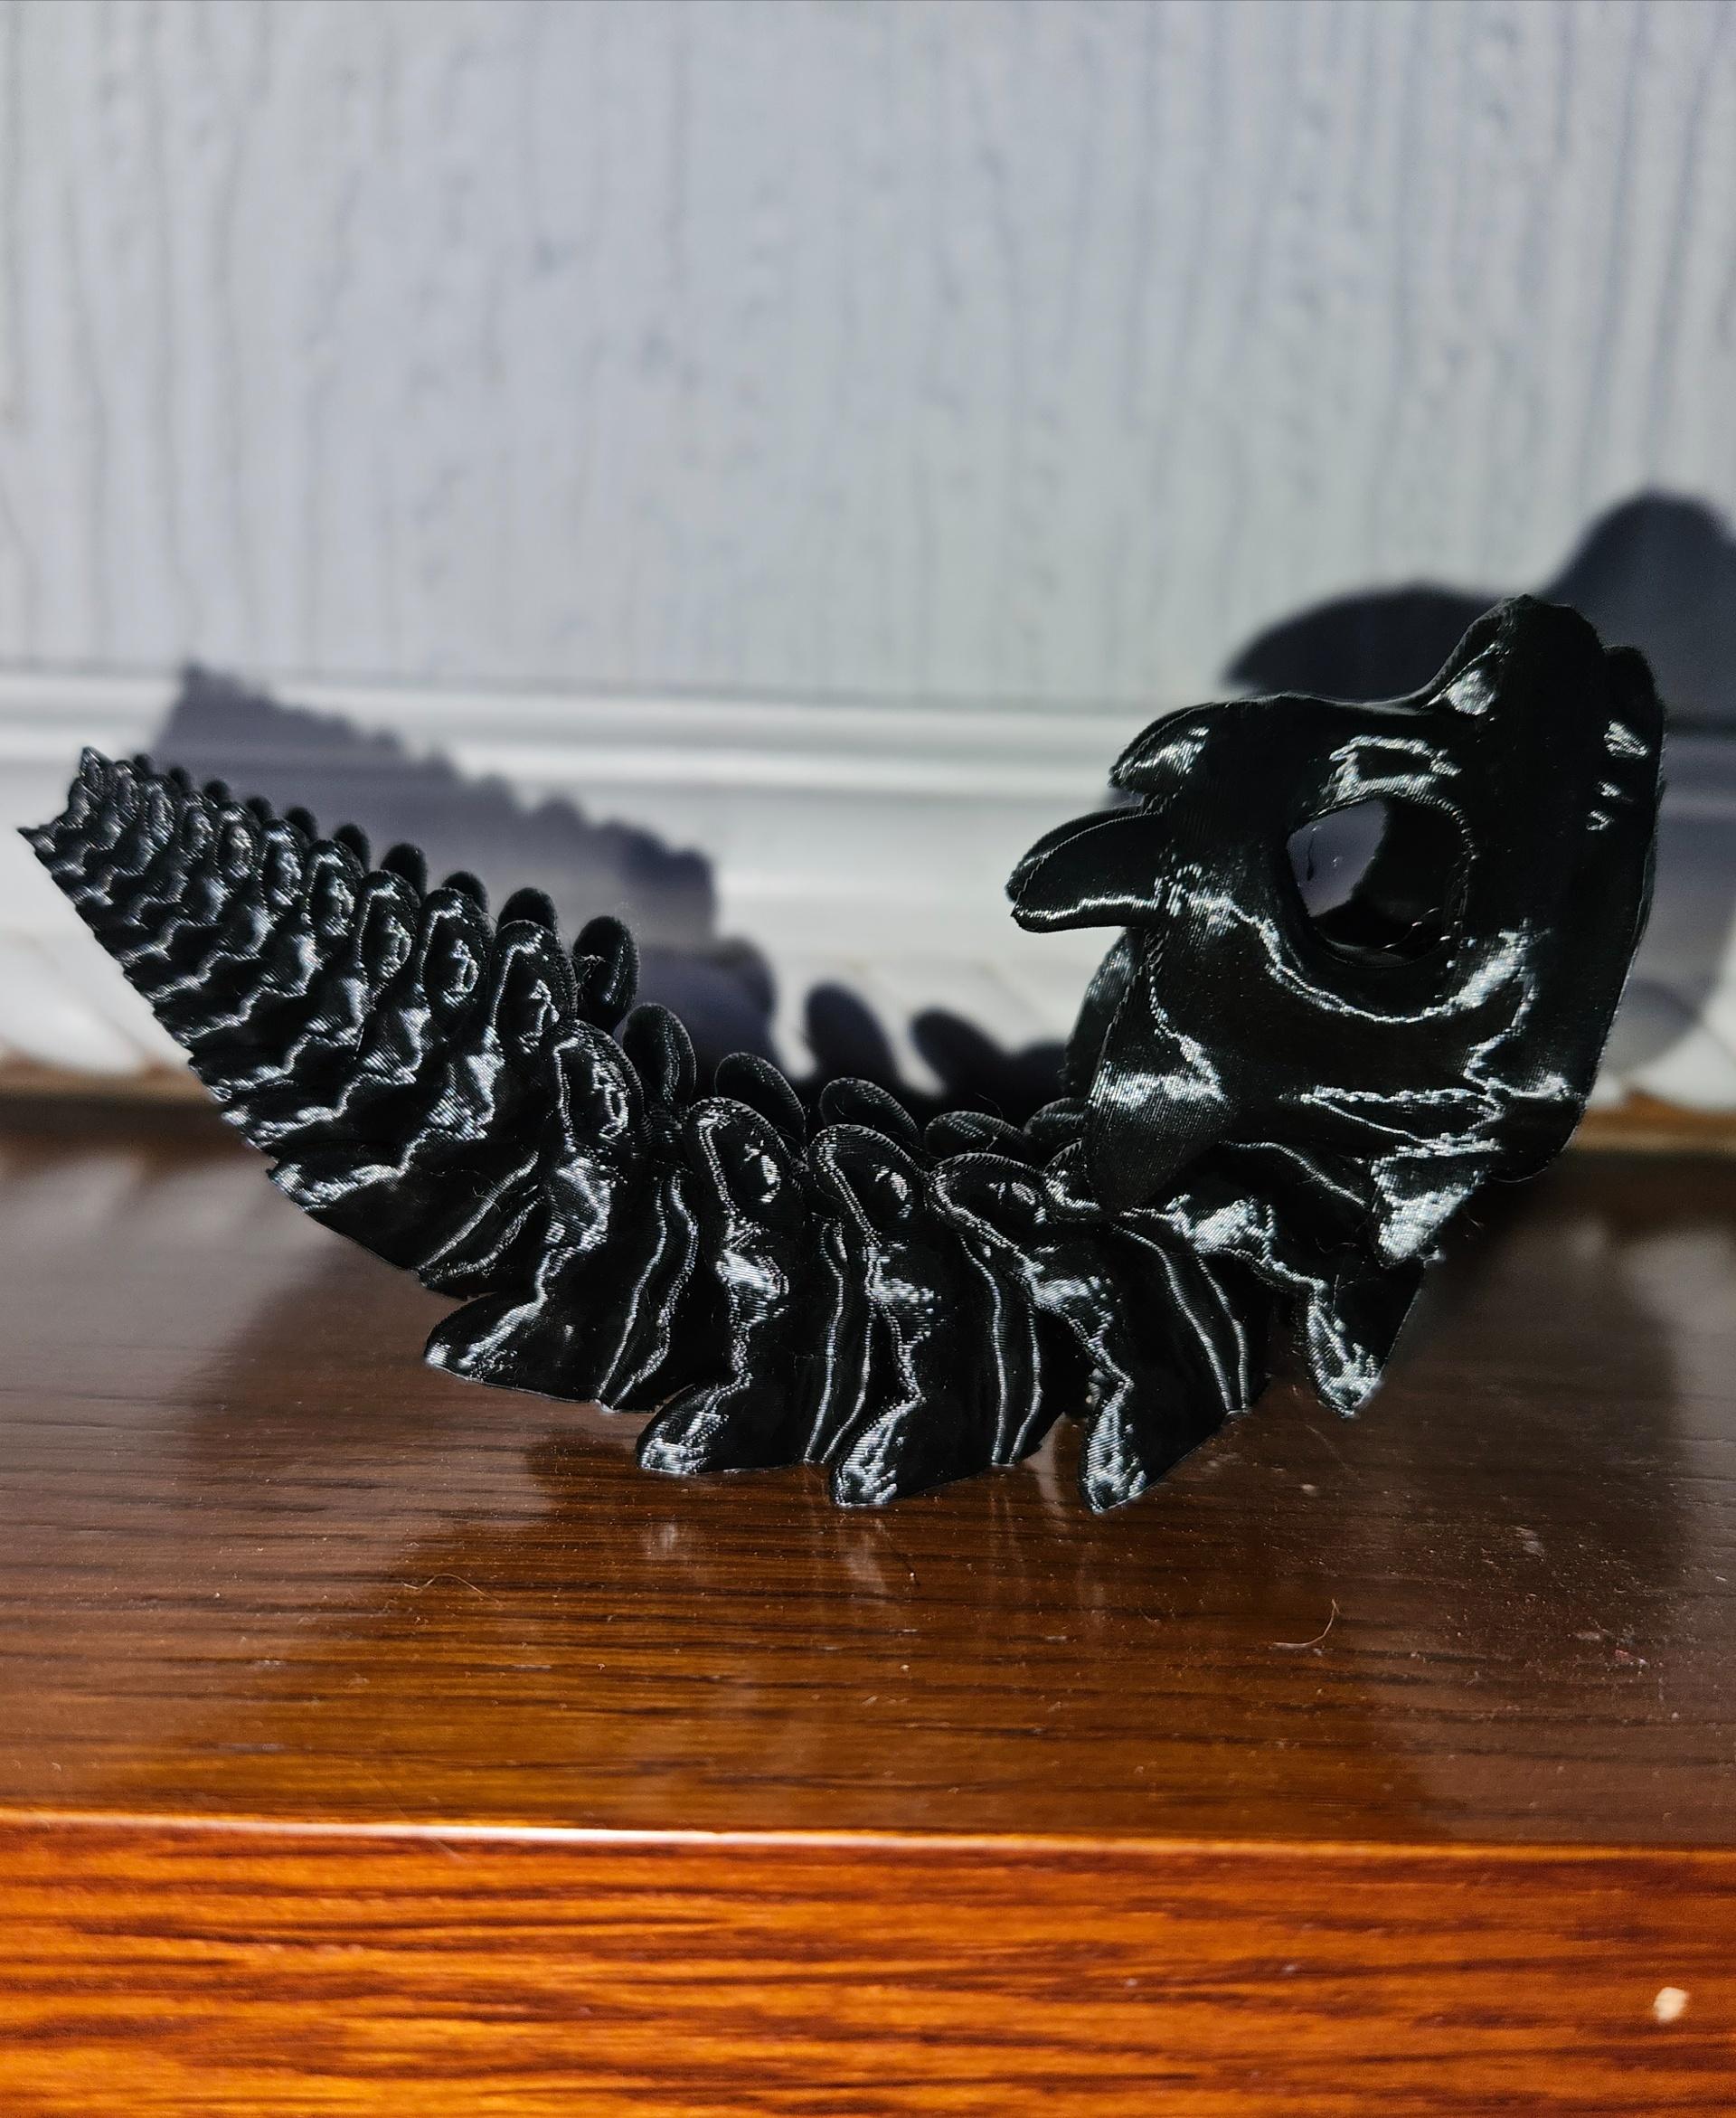 Short Bony Basilisk - Articulated Snap-Flex Fidget (Tight Joints) - This came out so well! Settings as described and 20% infill. Giantarm black PLA bed 60° nozzle 200° on Ender 3 S1 pro. On to the big boi now! - 3d model